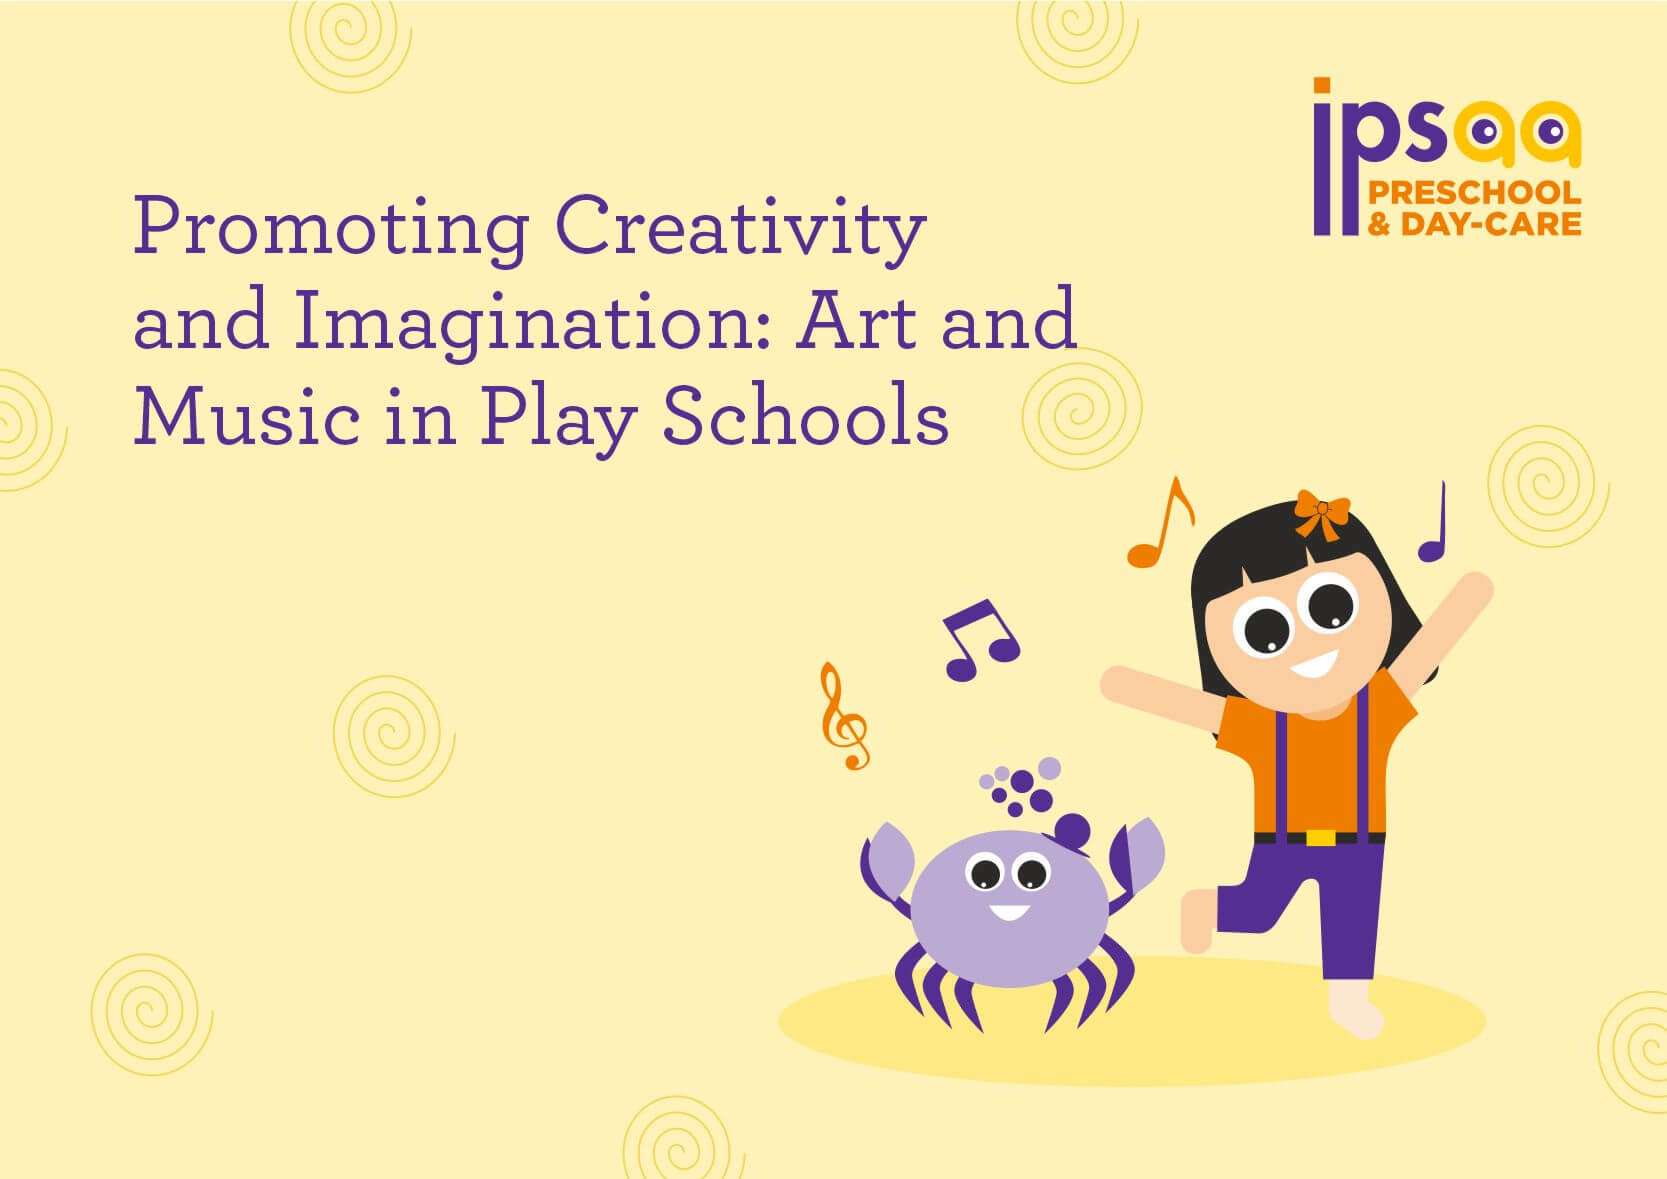 Promoting Creativity and Imagination: Art and Music in Play Schools